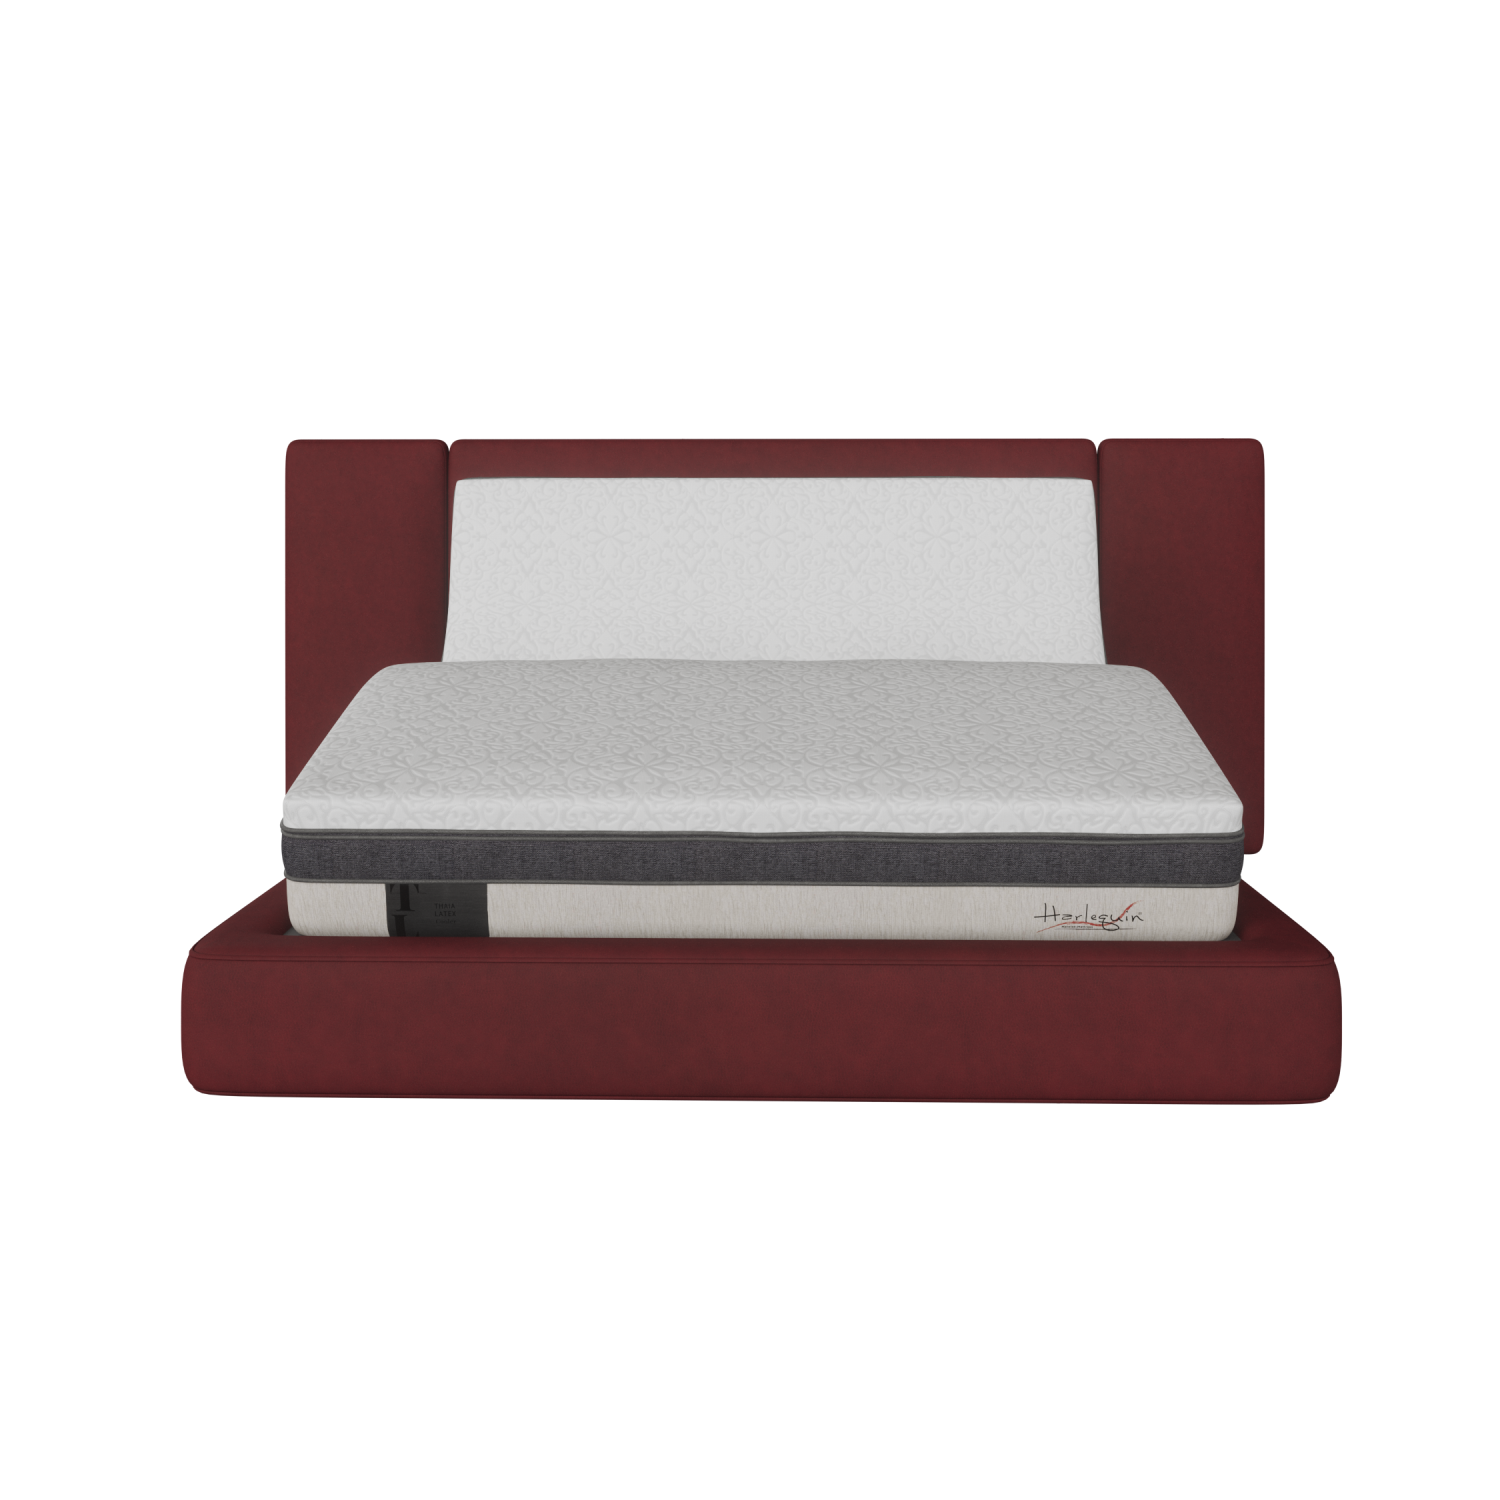 Thaia Adjustable Mattress Front View